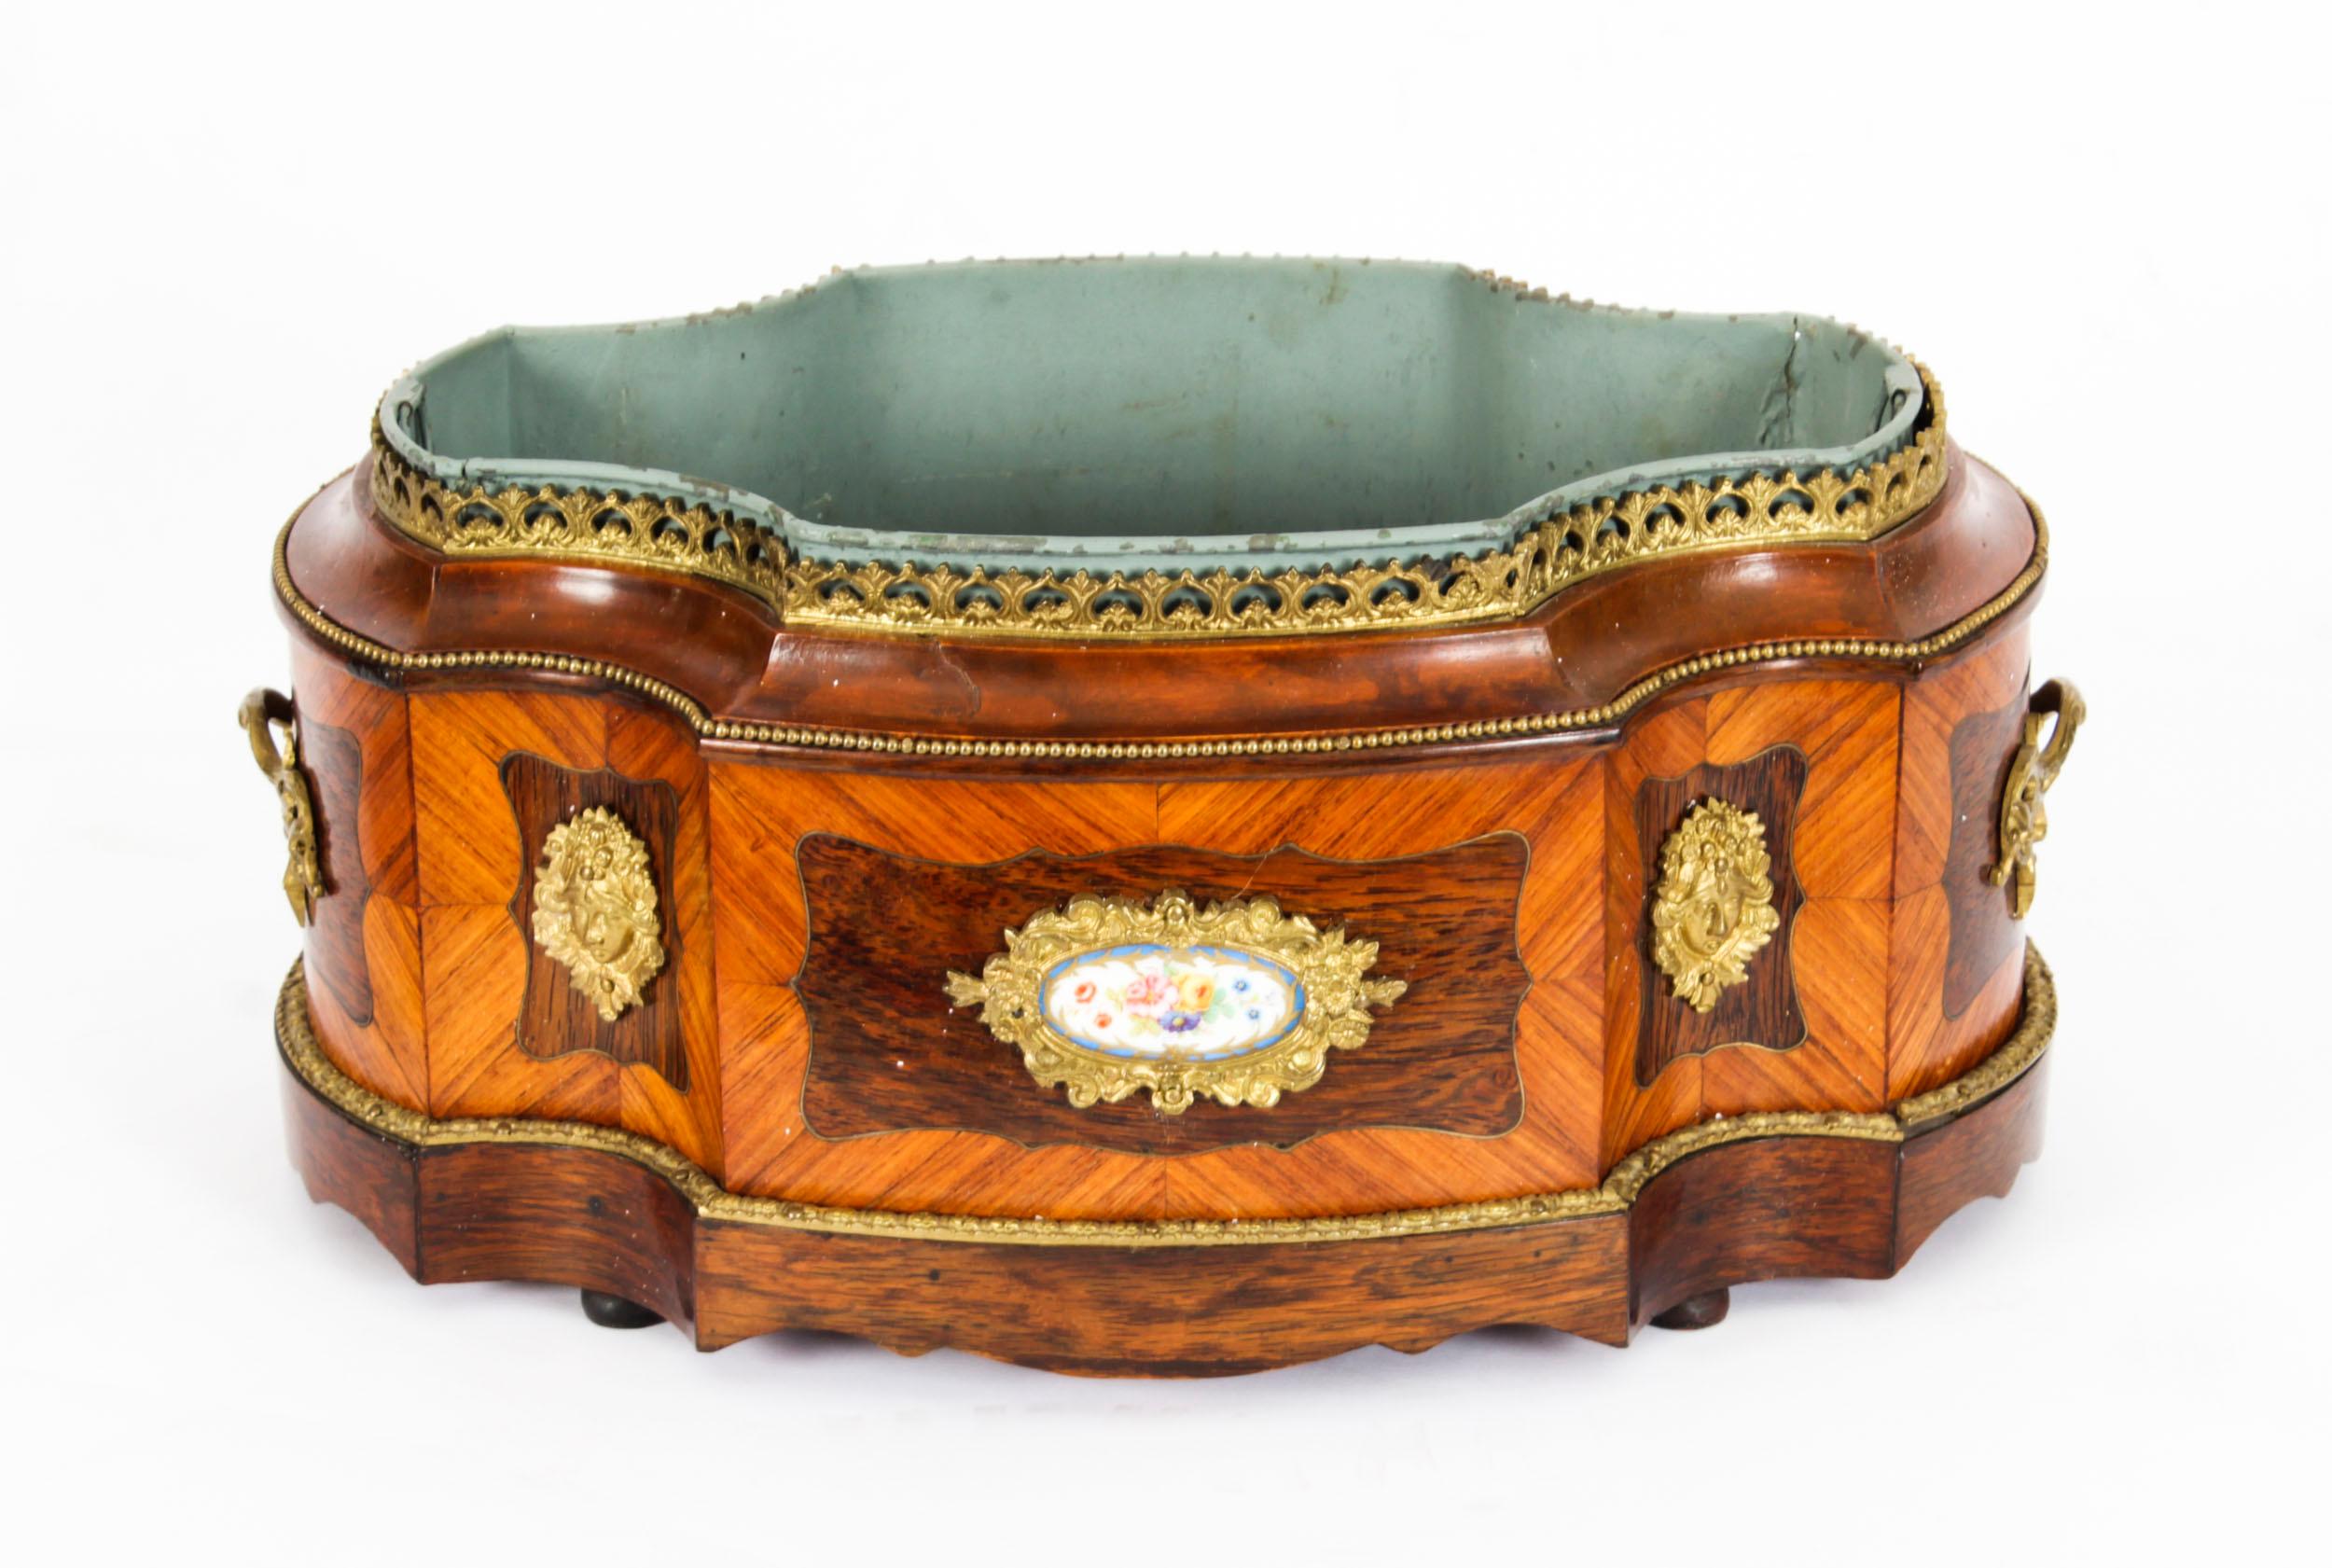 This is a superb antique French Louis XV revival ormolu and Sevres porcelain mounted, wood jardiniere, circa 1860 in date.
 
This beautiful planter has splendid ormolu mounts enclosing an enchanting hand-painted and gilded Sevres porcelain plaques